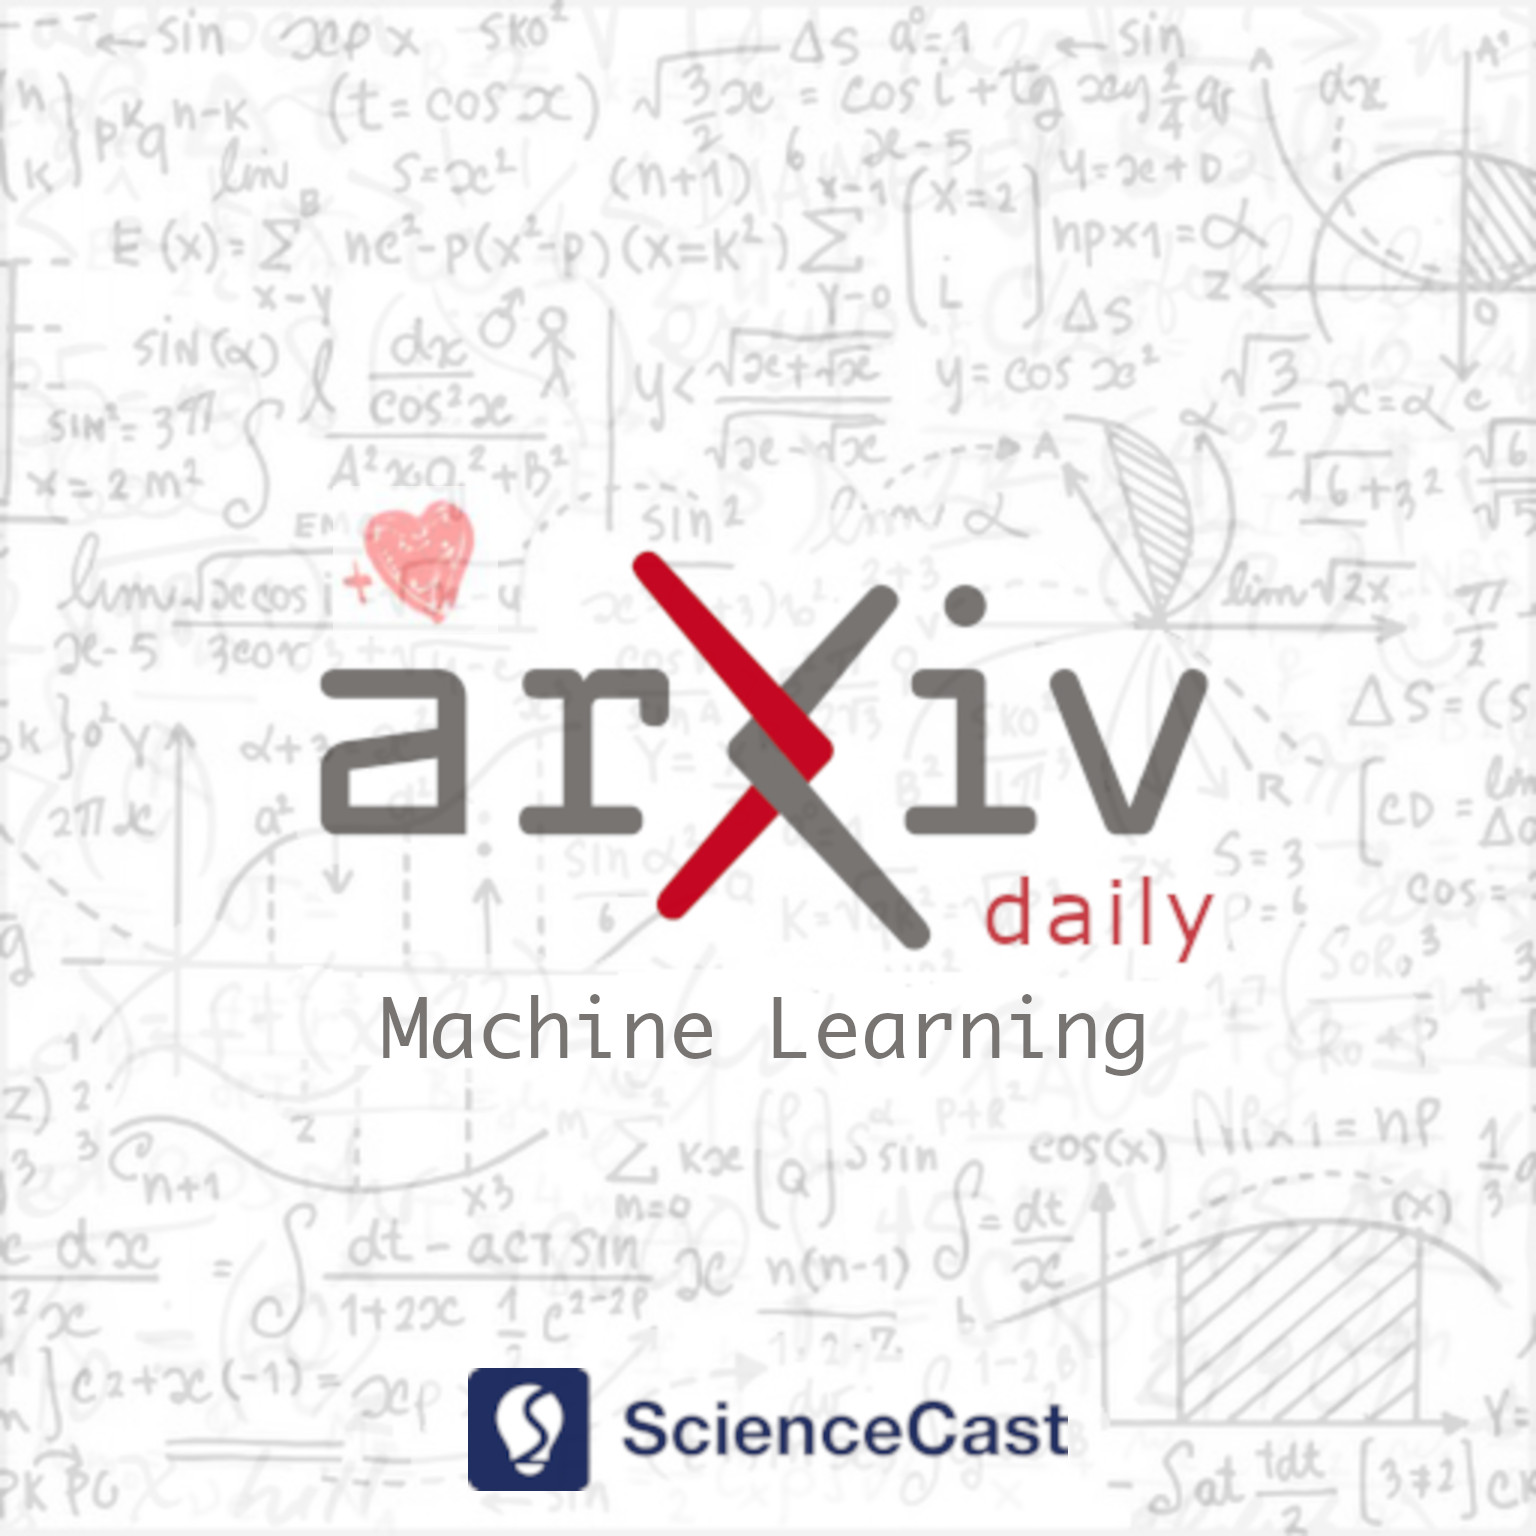 arXiv daily: Machine Learning